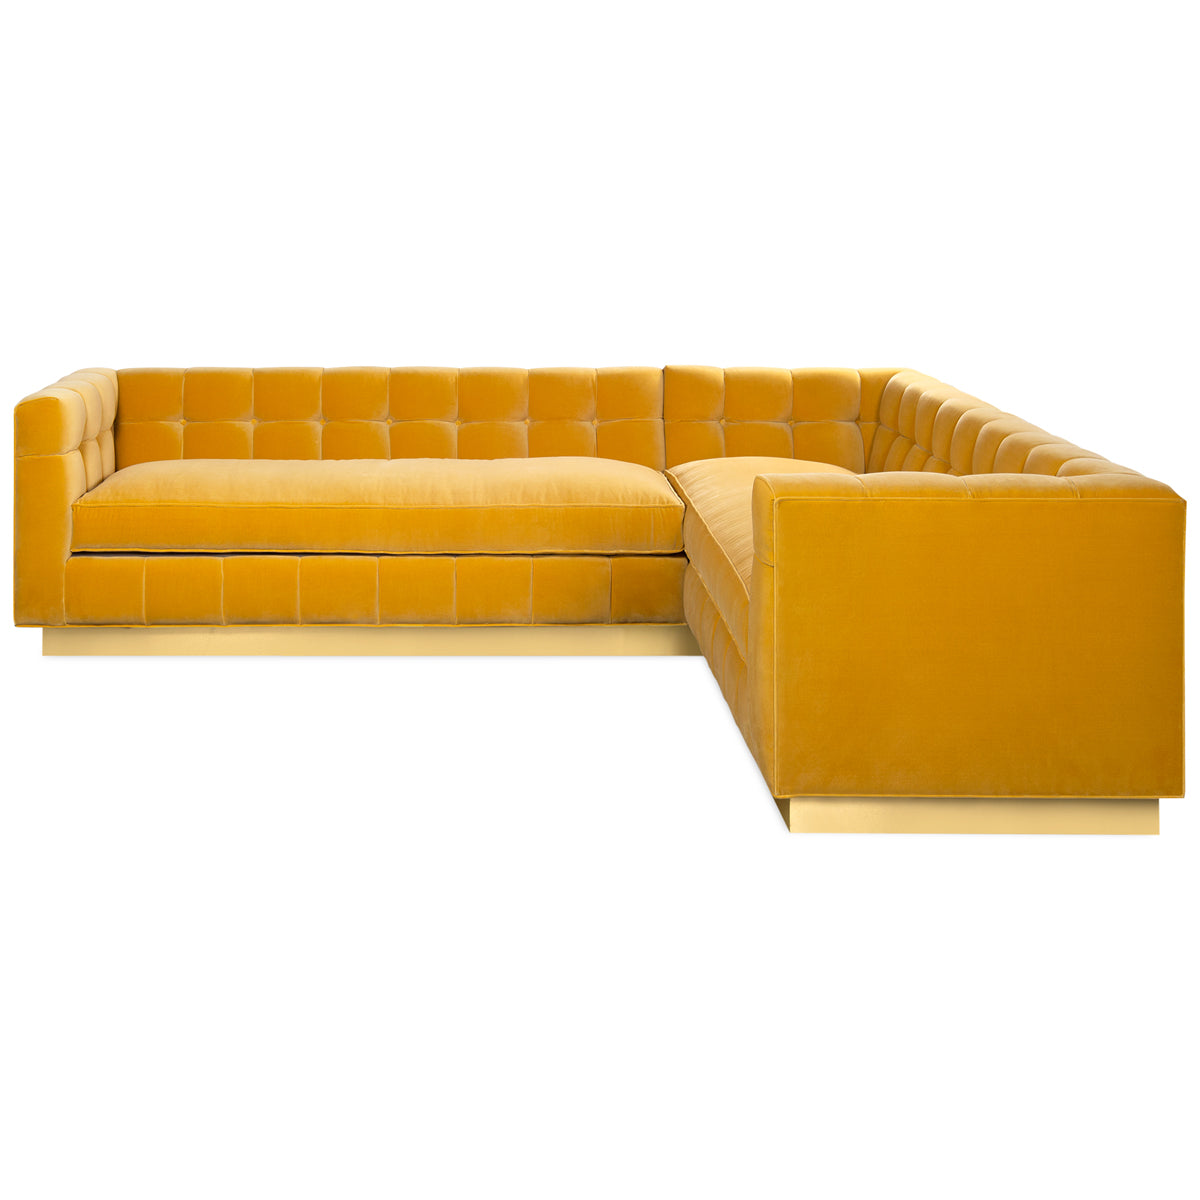 Delano Sectional with Loose Seat Cushions